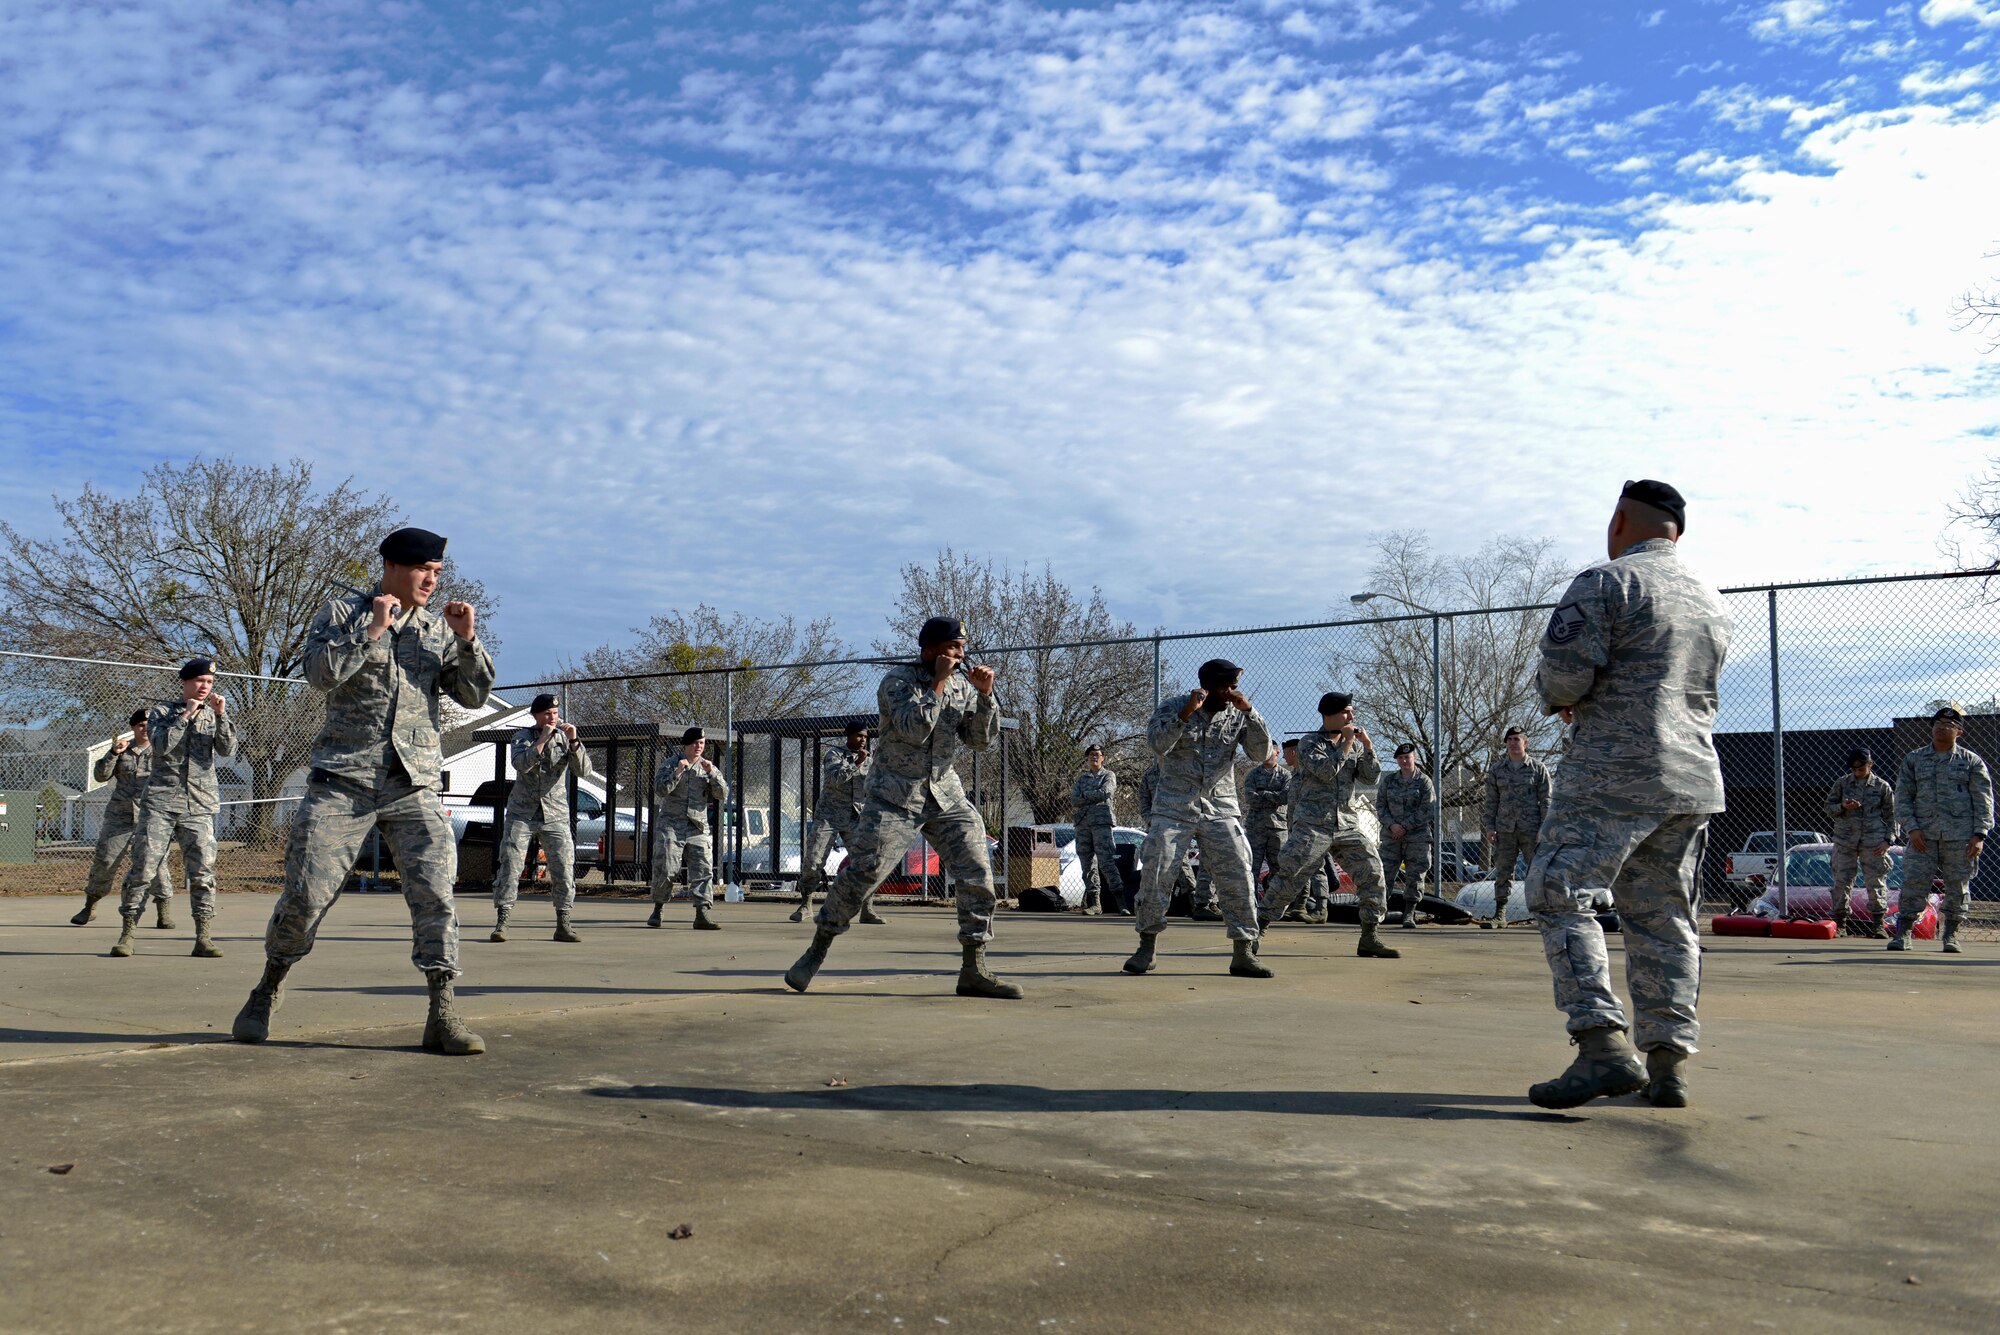 Airmen assigned to the 20th Security Forces Squadron perform baton drills at Shaw Air Force Base, S.C., Jan. 18, 2017. During a use of force training day, 20th SFS Airmen reviewed less-lethal weapons used by law enforcement officers including pepper spray, the Taser and the baton. (U.S. Air Force photo by Airman 1st Class Destinee Sweeney)